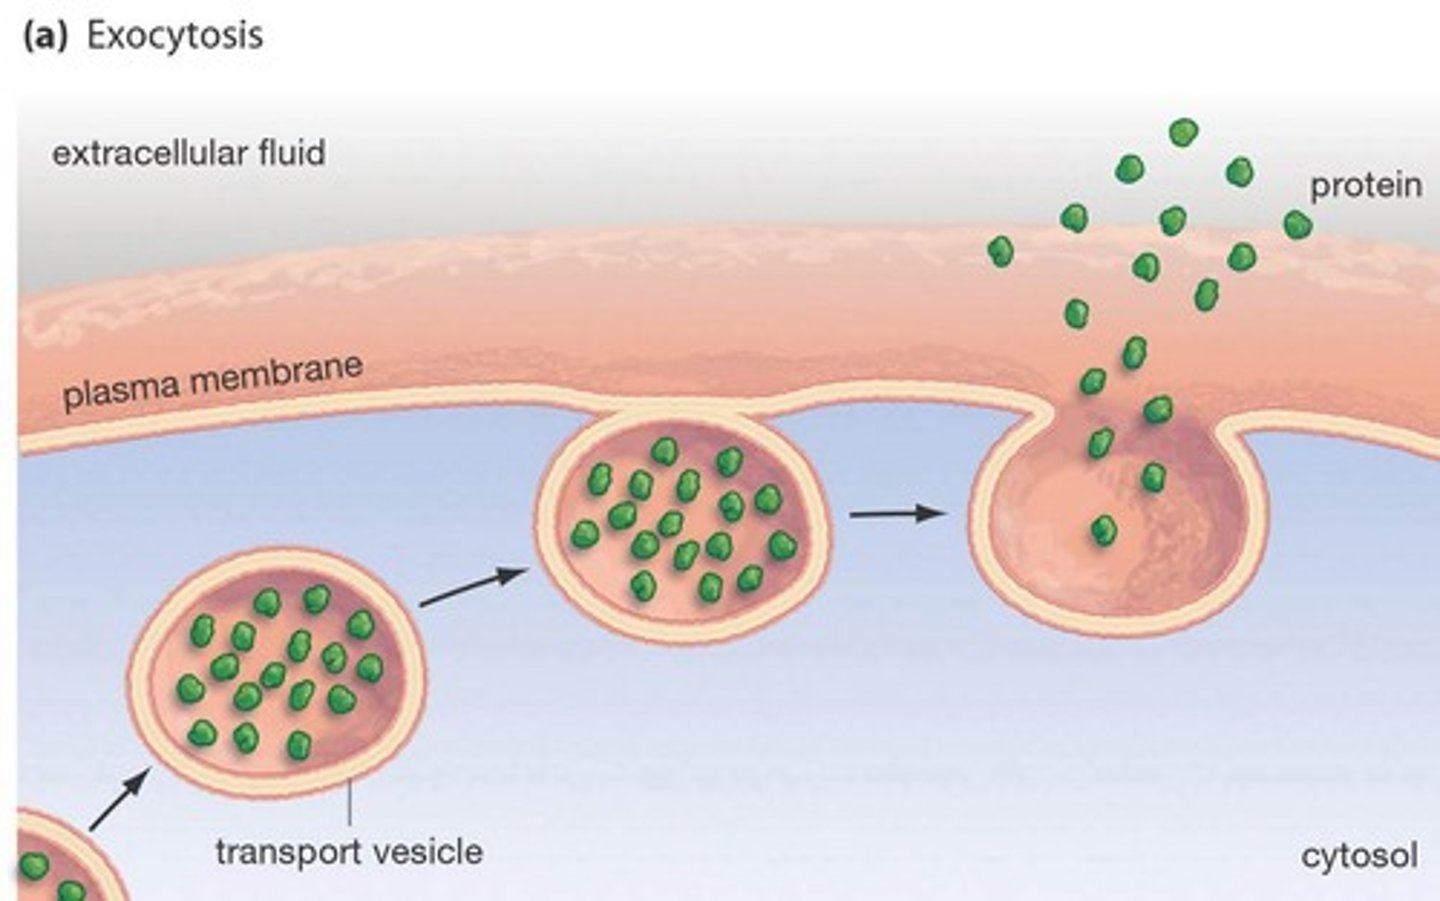 <p>a process by which the contents of a cell vacuole are released to the exterior through fusion of the vacuole membrane with the cell membrane.</p>